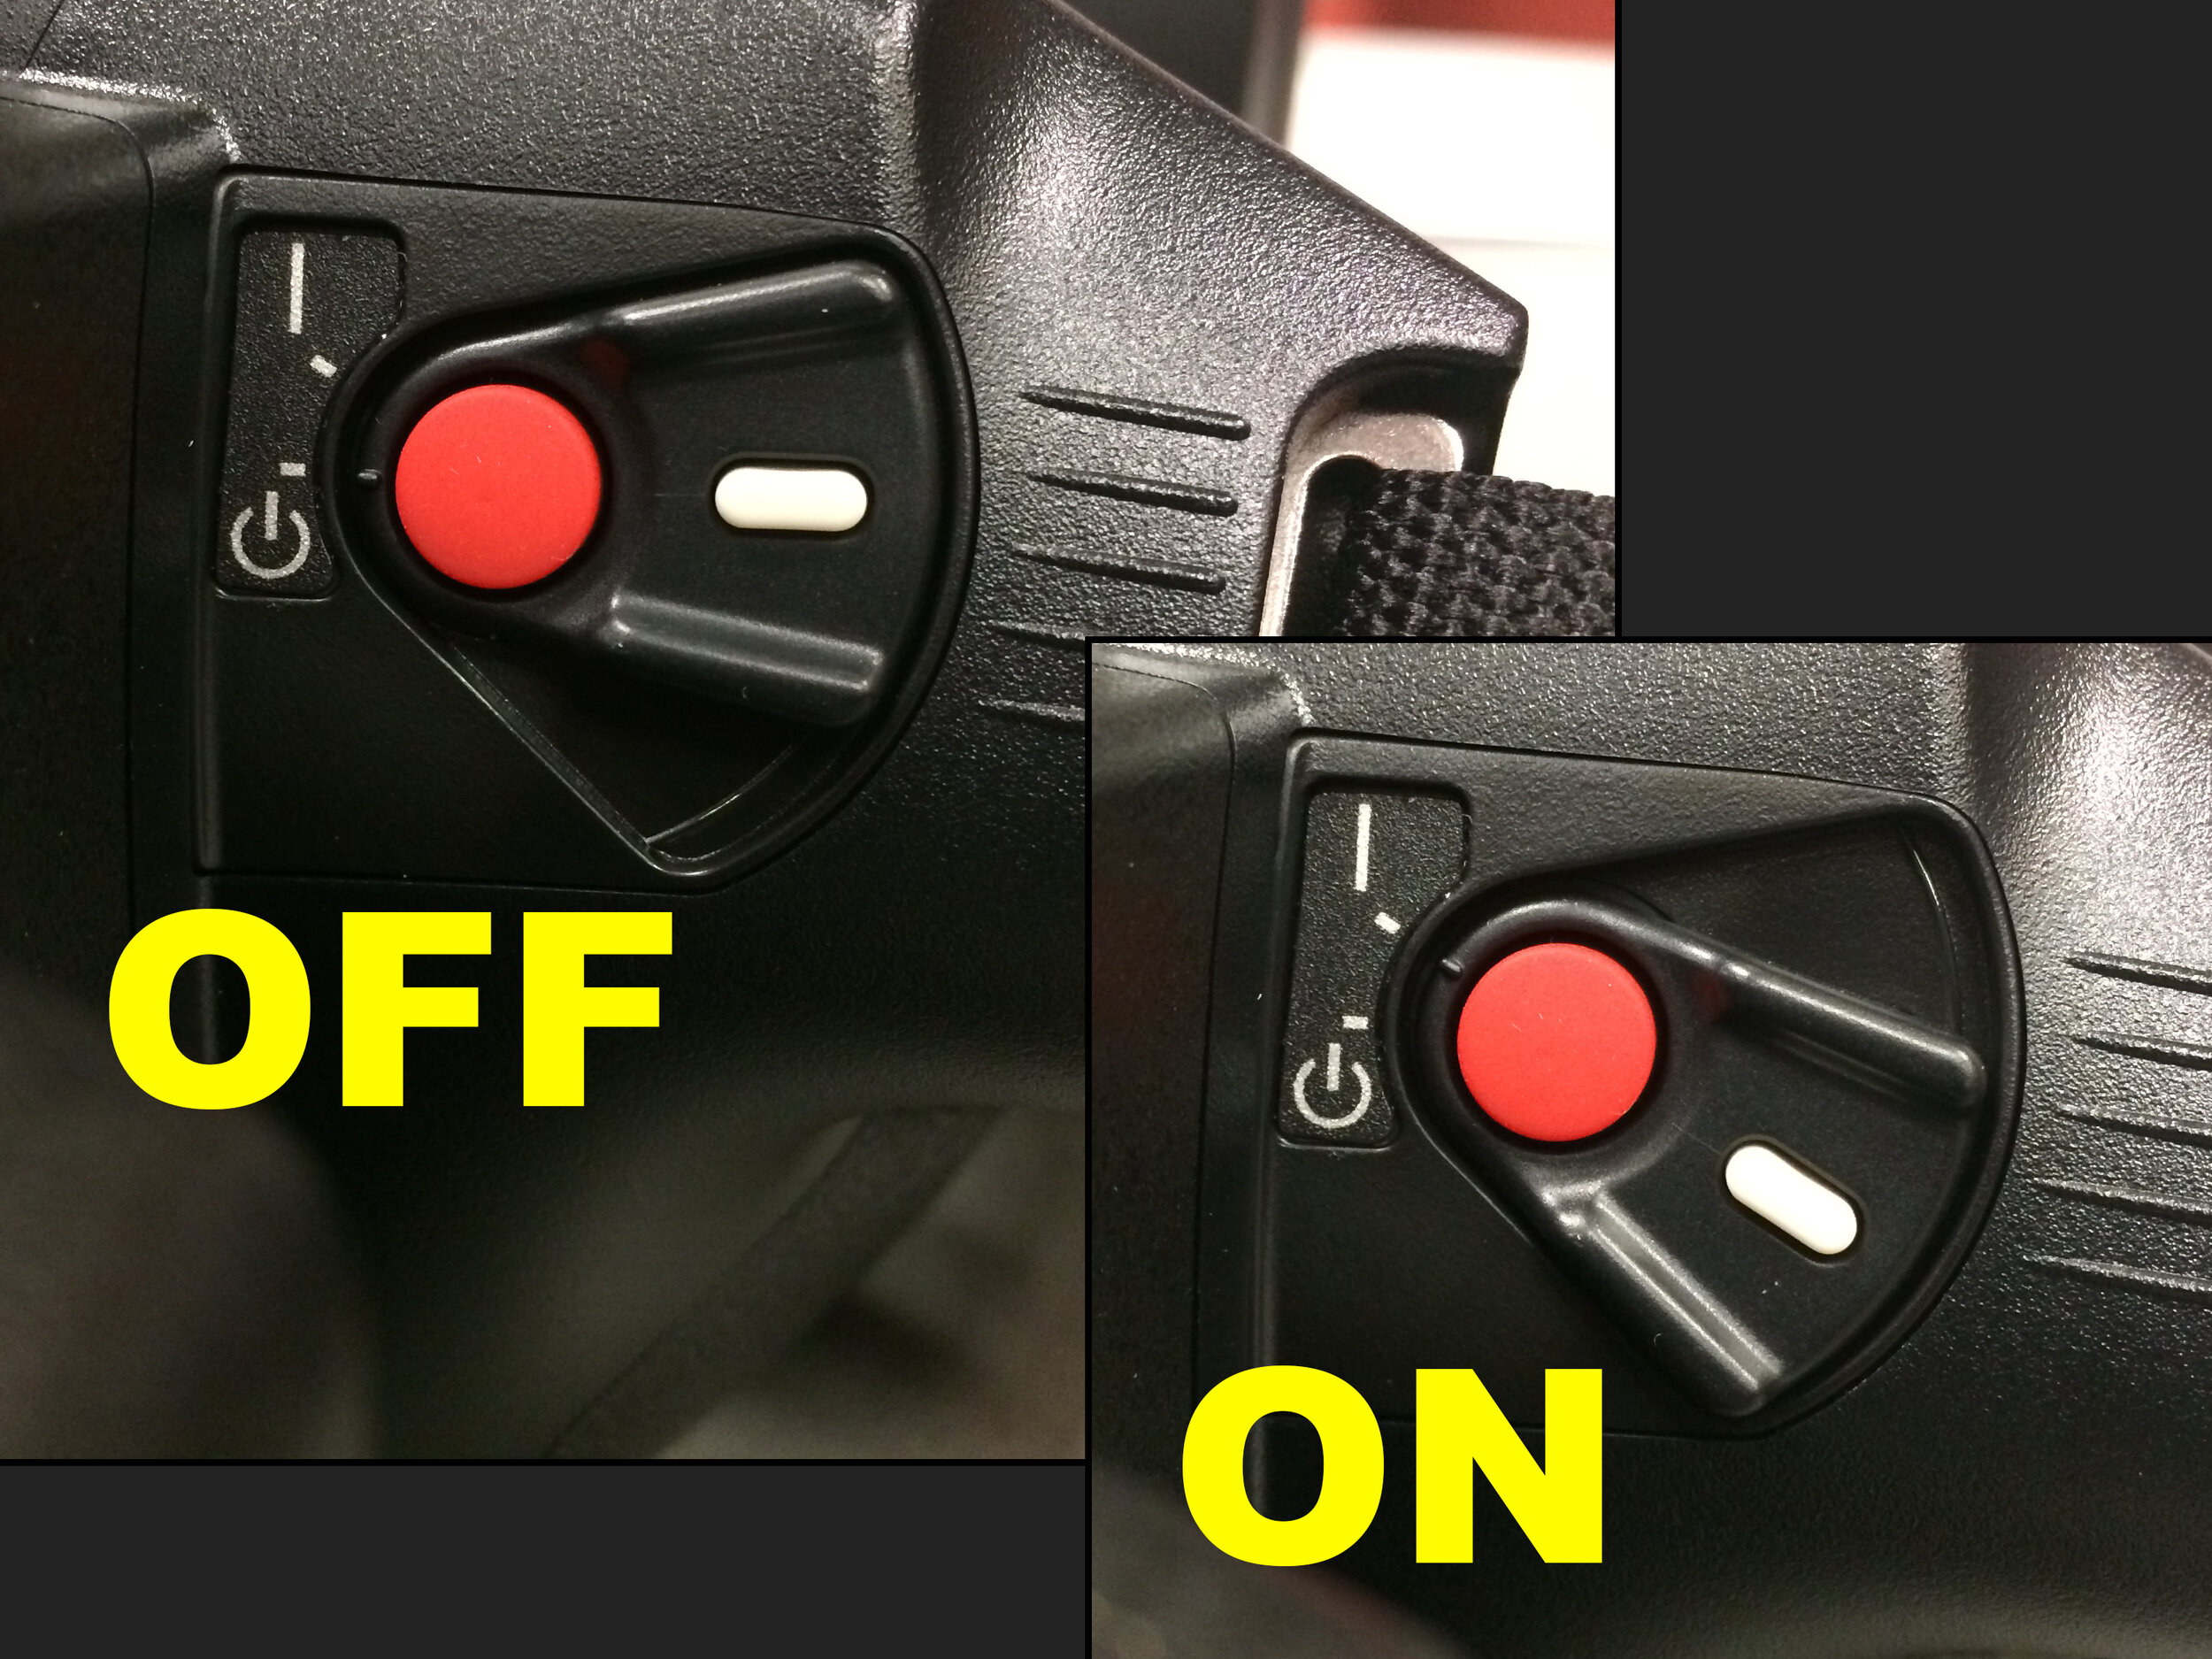 ON/OFF Switch